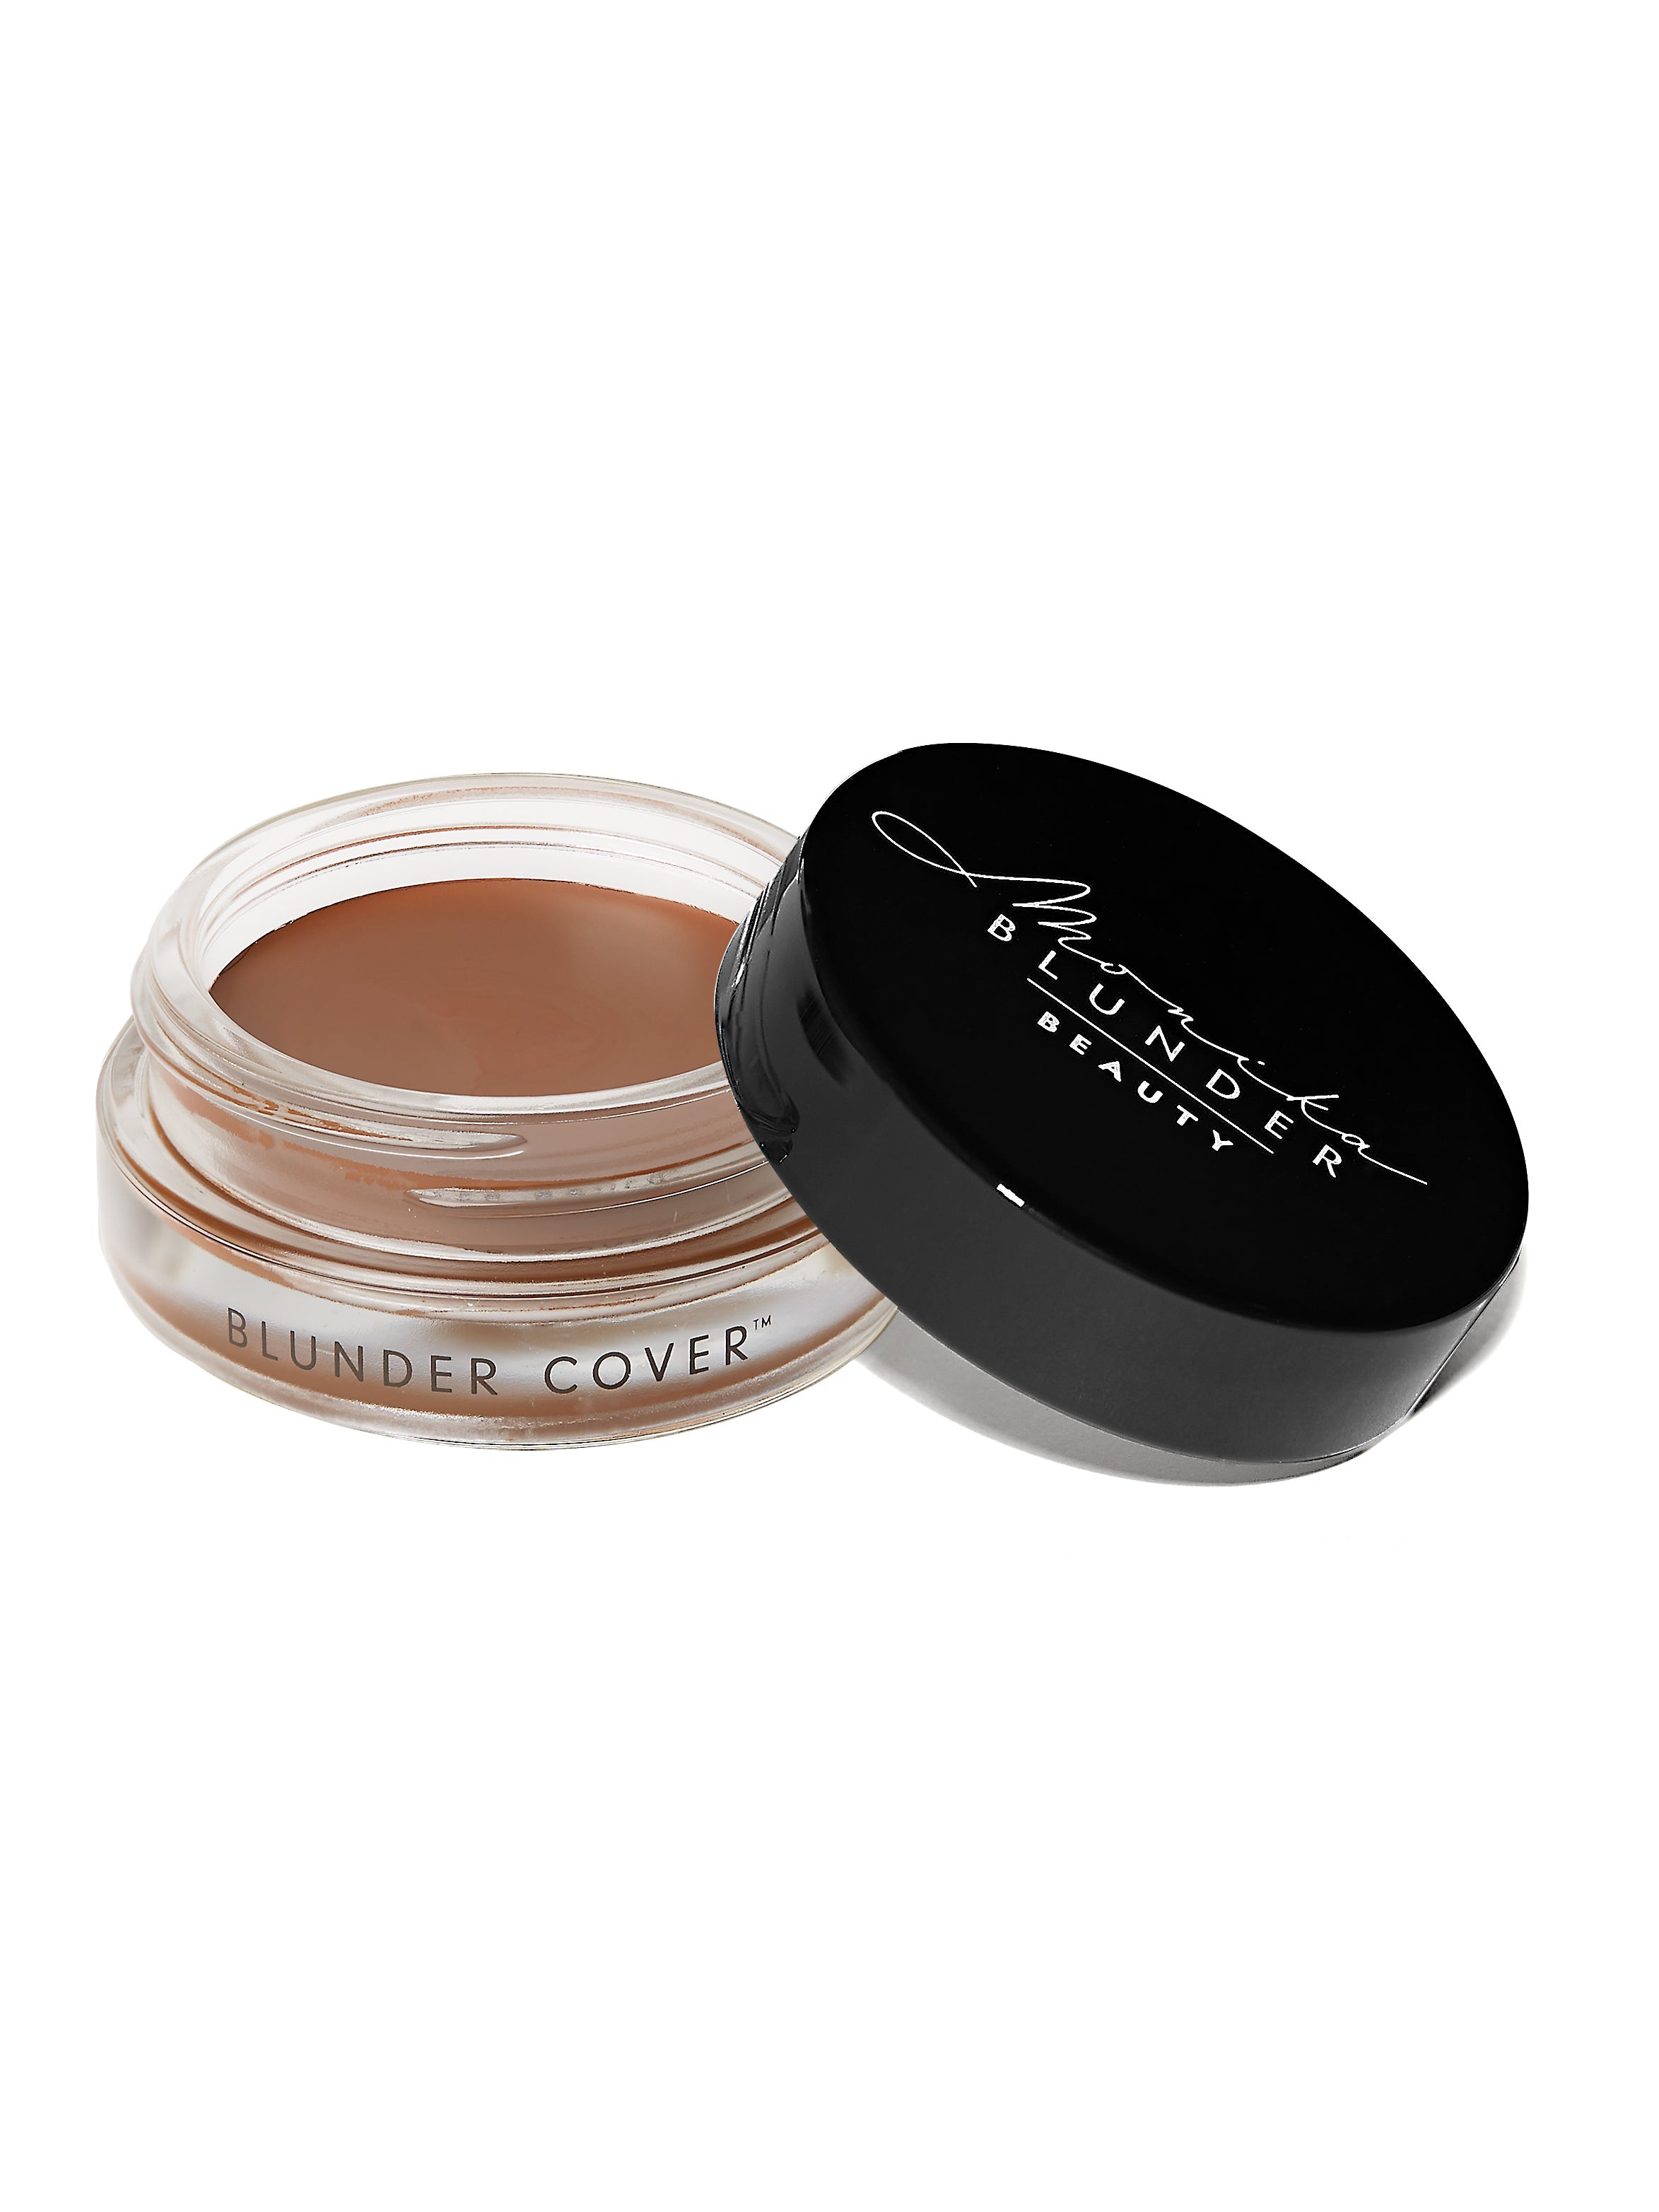 Blunder Cover an All-In-One Foundation/Concealer Shade - Sieben.5 - 0